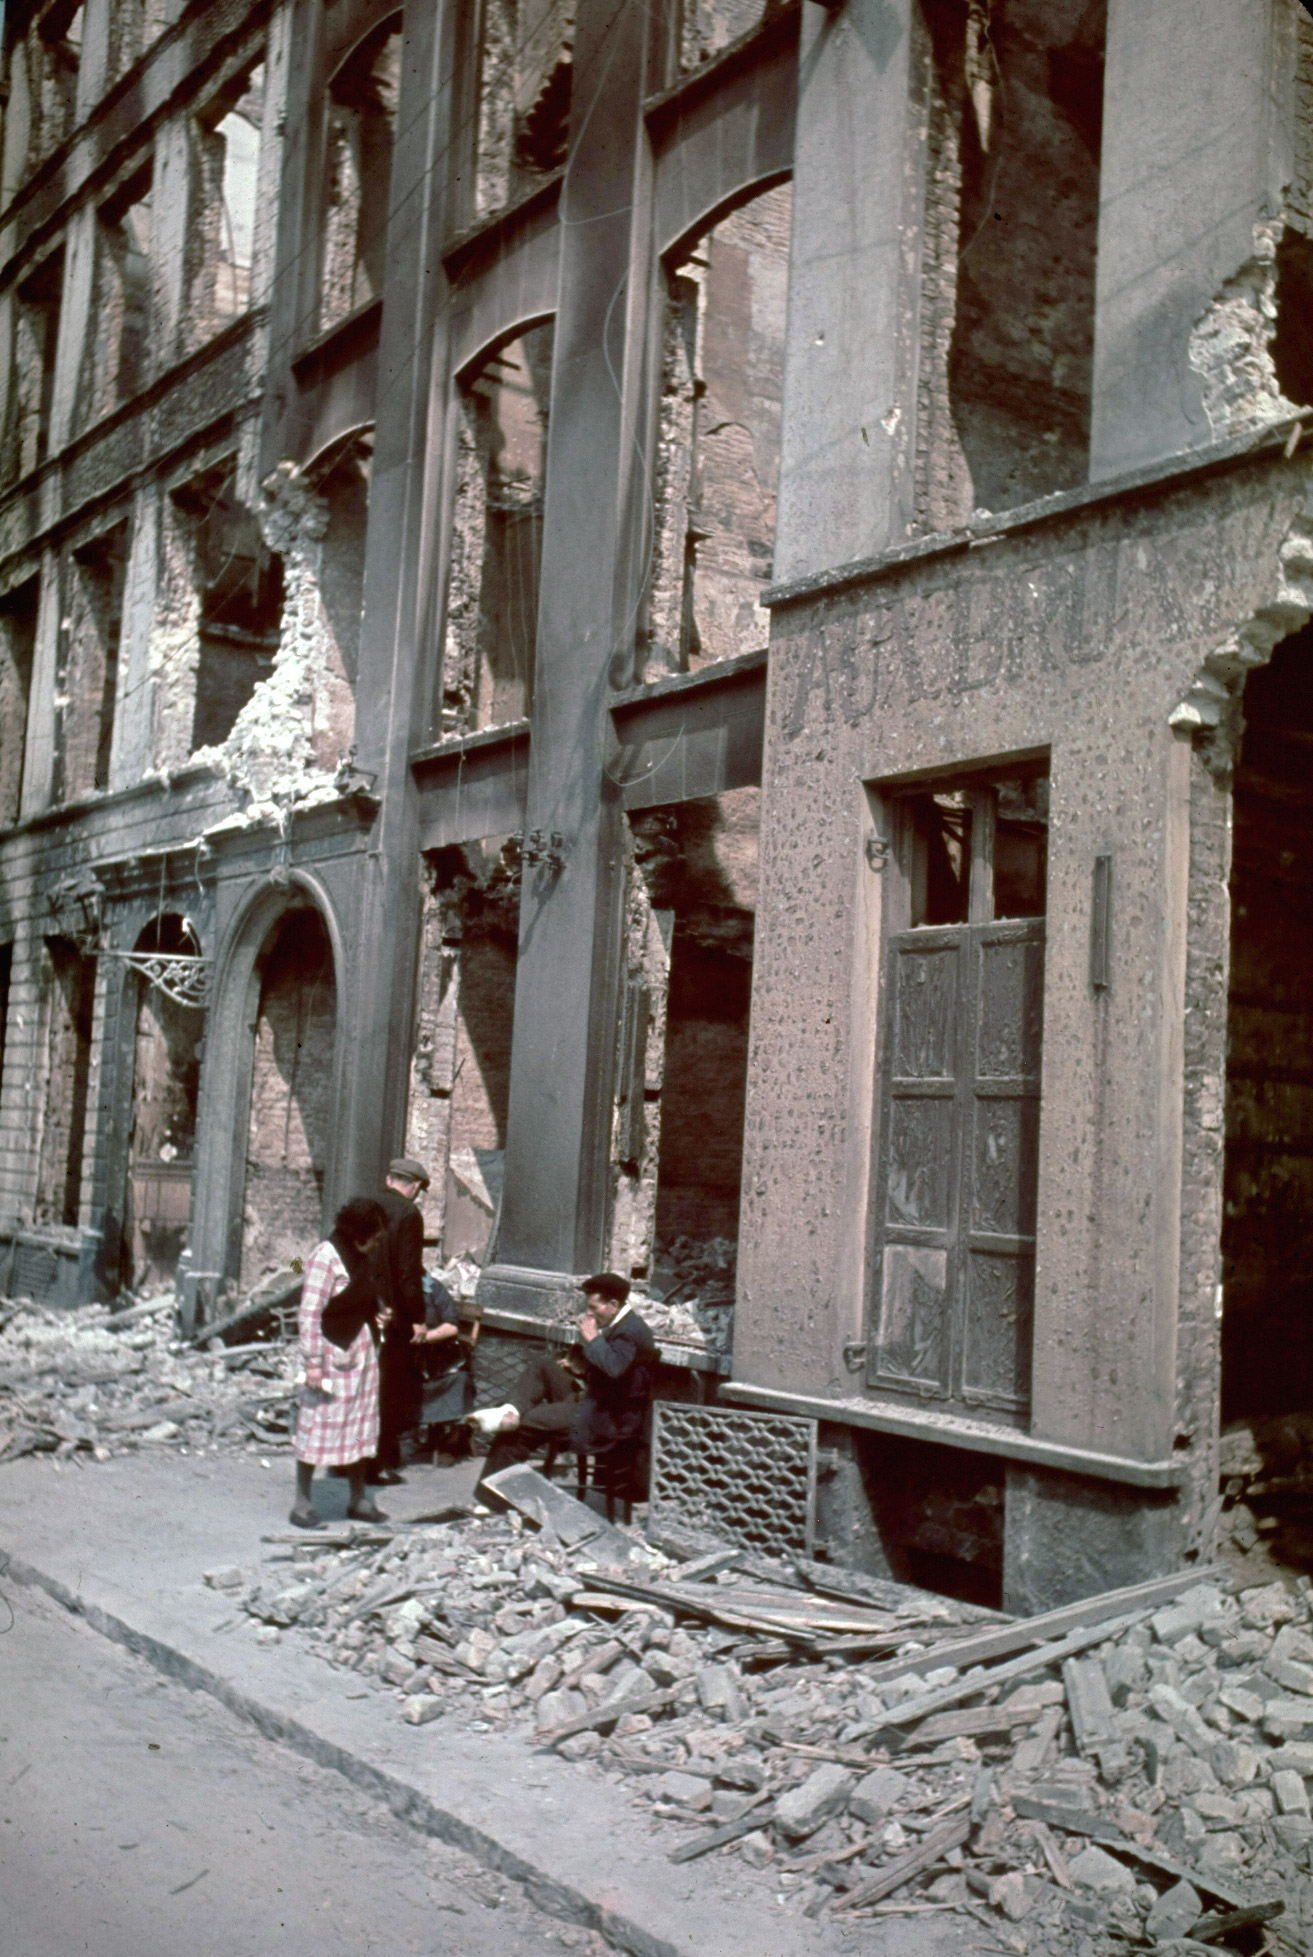 Dunkirk after British bombardment and retreat. 1940.